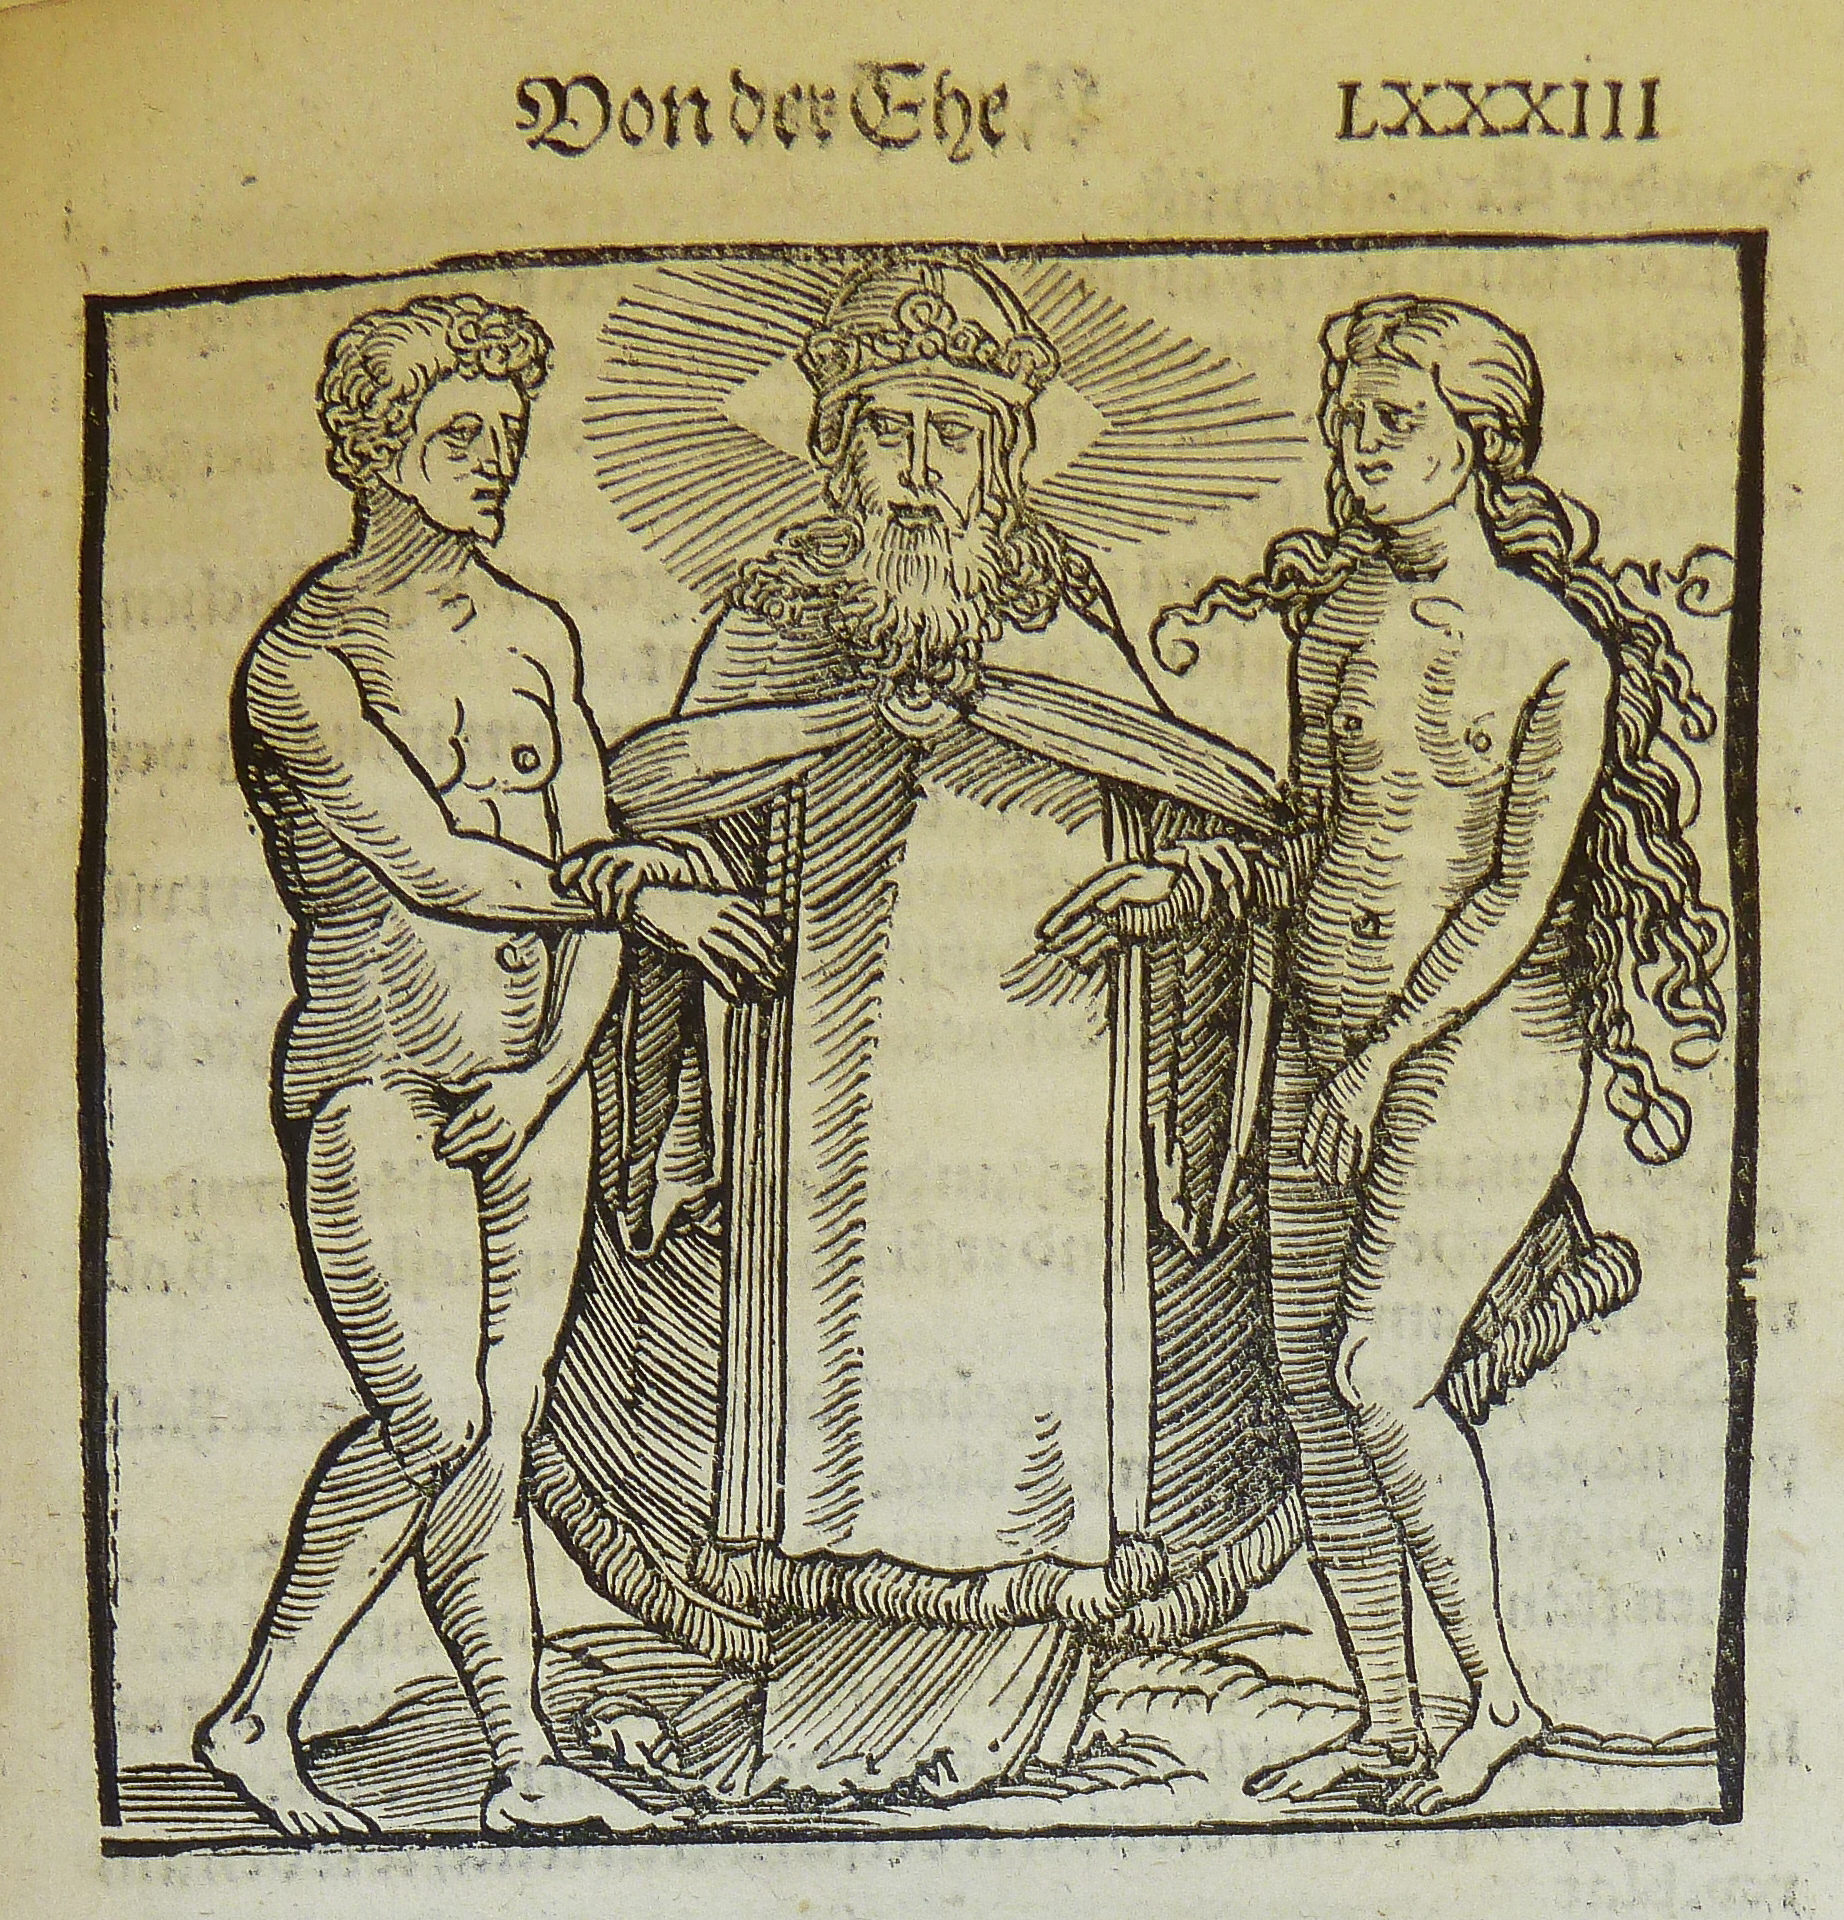 Woodcut illustration of God joining man and woman (or possibly Adam and Eve, specifically) in marriage, used by Heinrich Stayner of Augsburg photo by Penn Provenance Project on Flickr